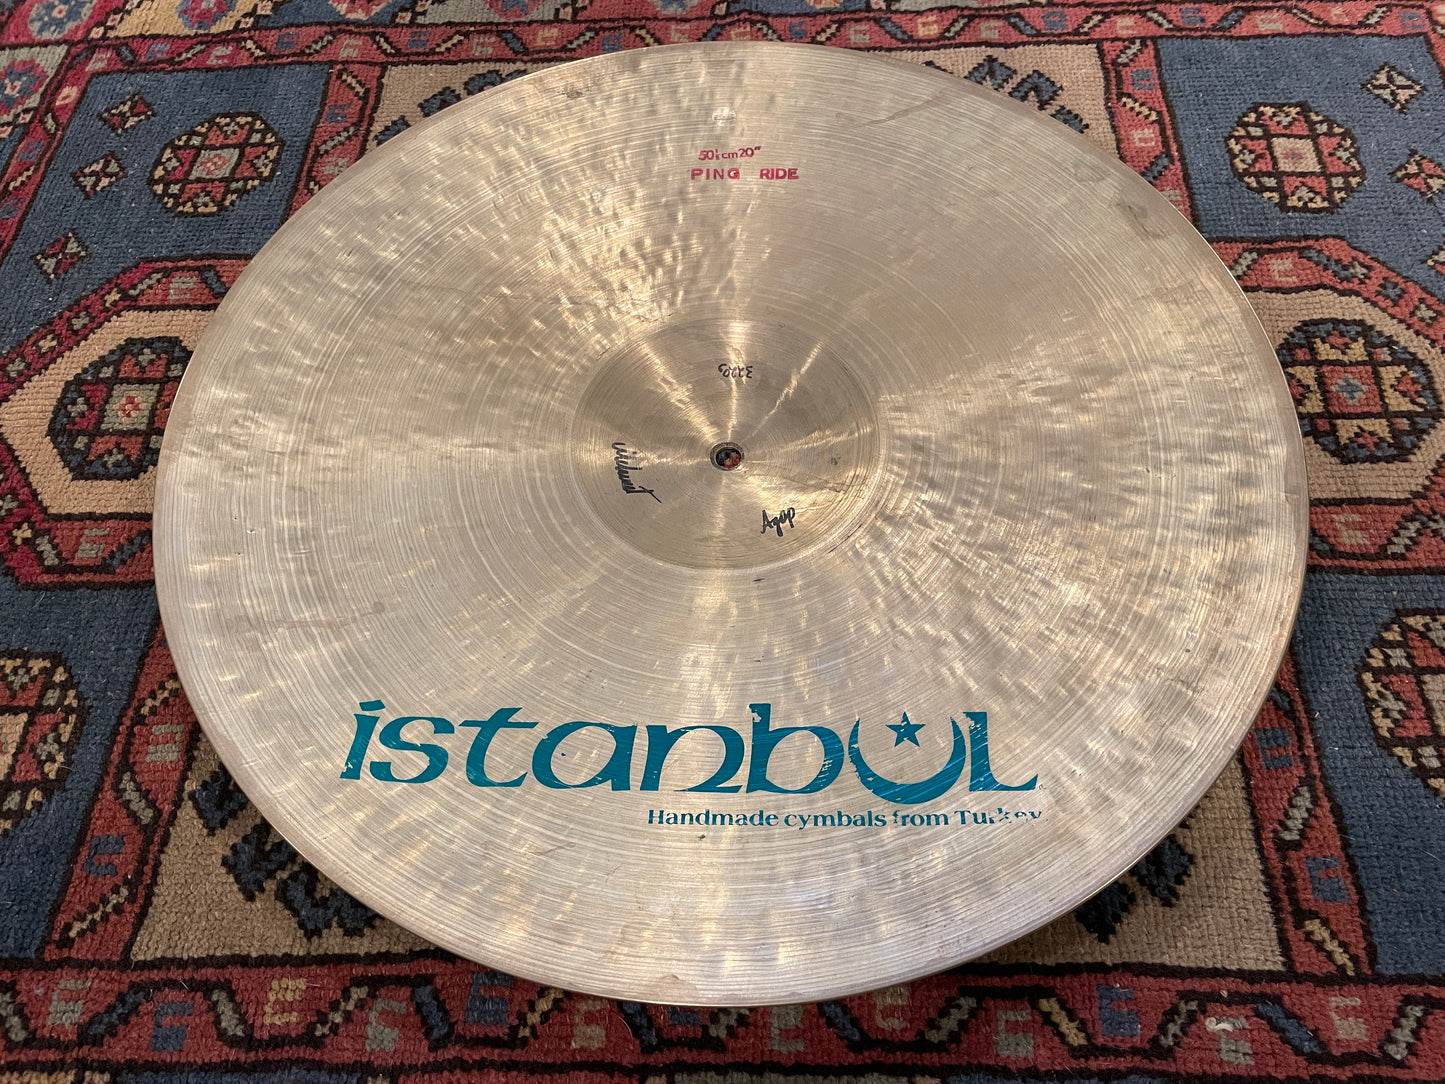 20" Istanbul Pre-Split Green Label Ping Ride Cymbal 3220g Vinnie Colaiuta Signed